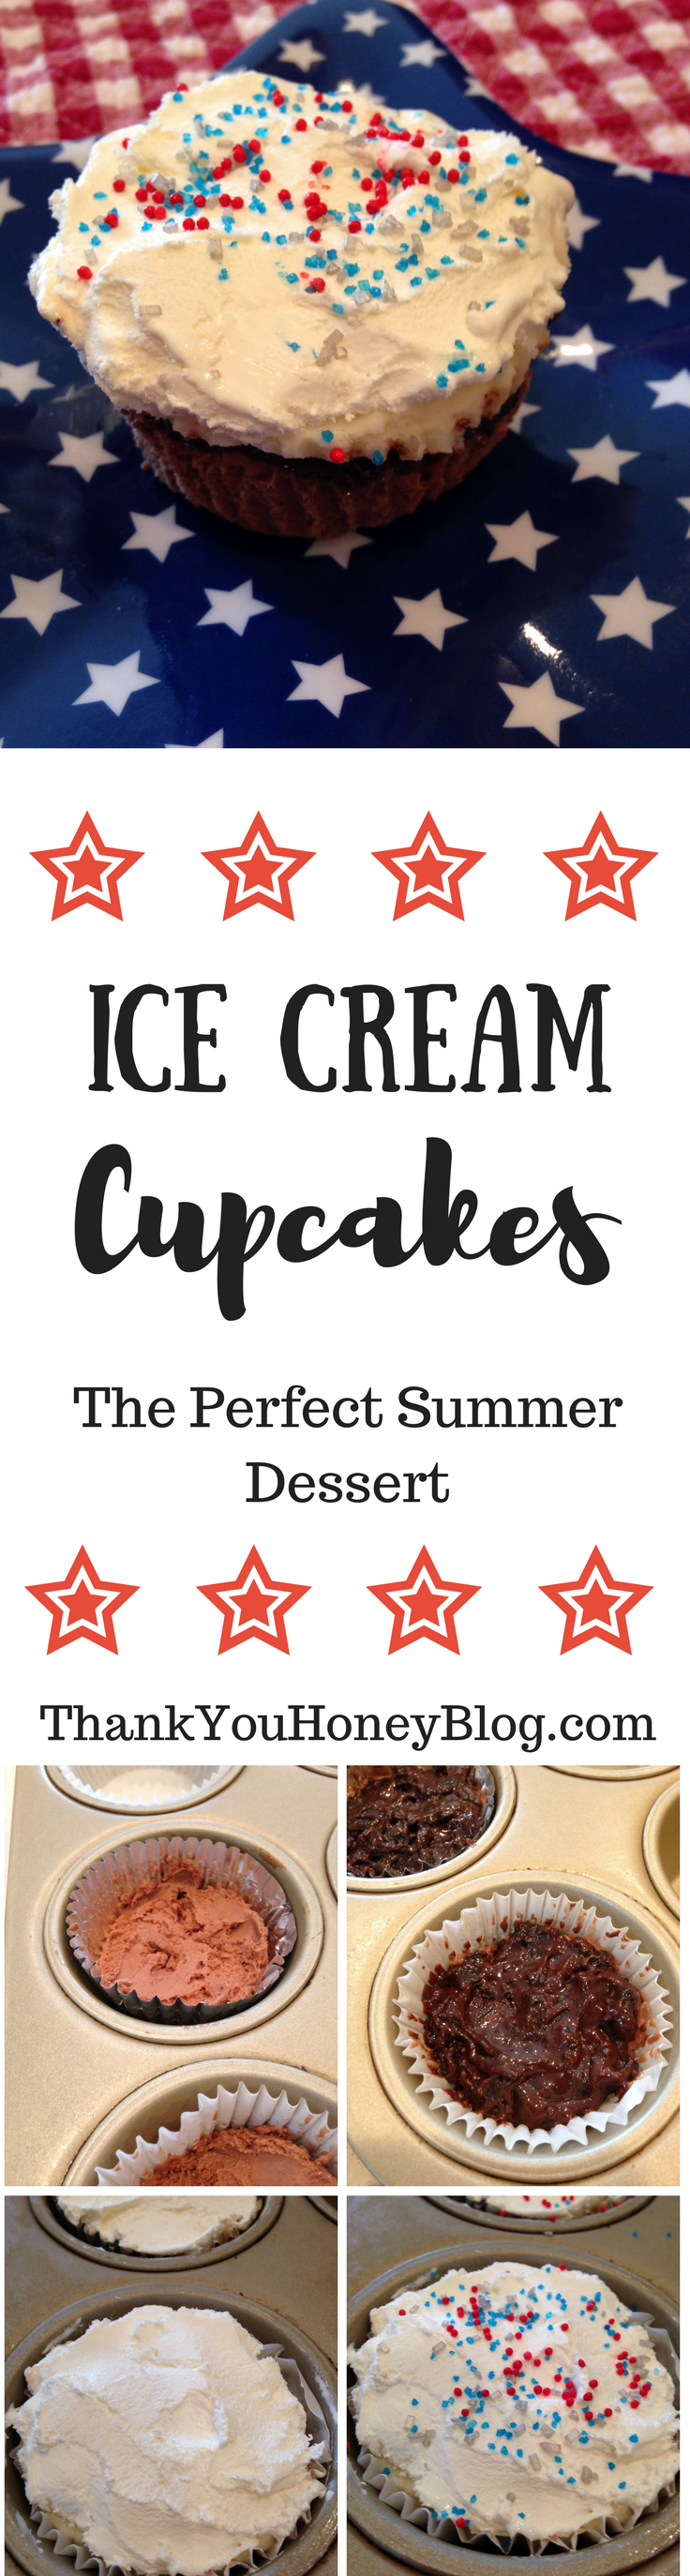 Ice Cream Cupcakes, Ice Cream Cupcakes, Recipe, Ice Cream, Cupcakes, Summer, Desserts, Recipes, BBQ Recipes, BBQ, Simple Recipe, Sweets, 4th of July, Memorial Day, Labor Day